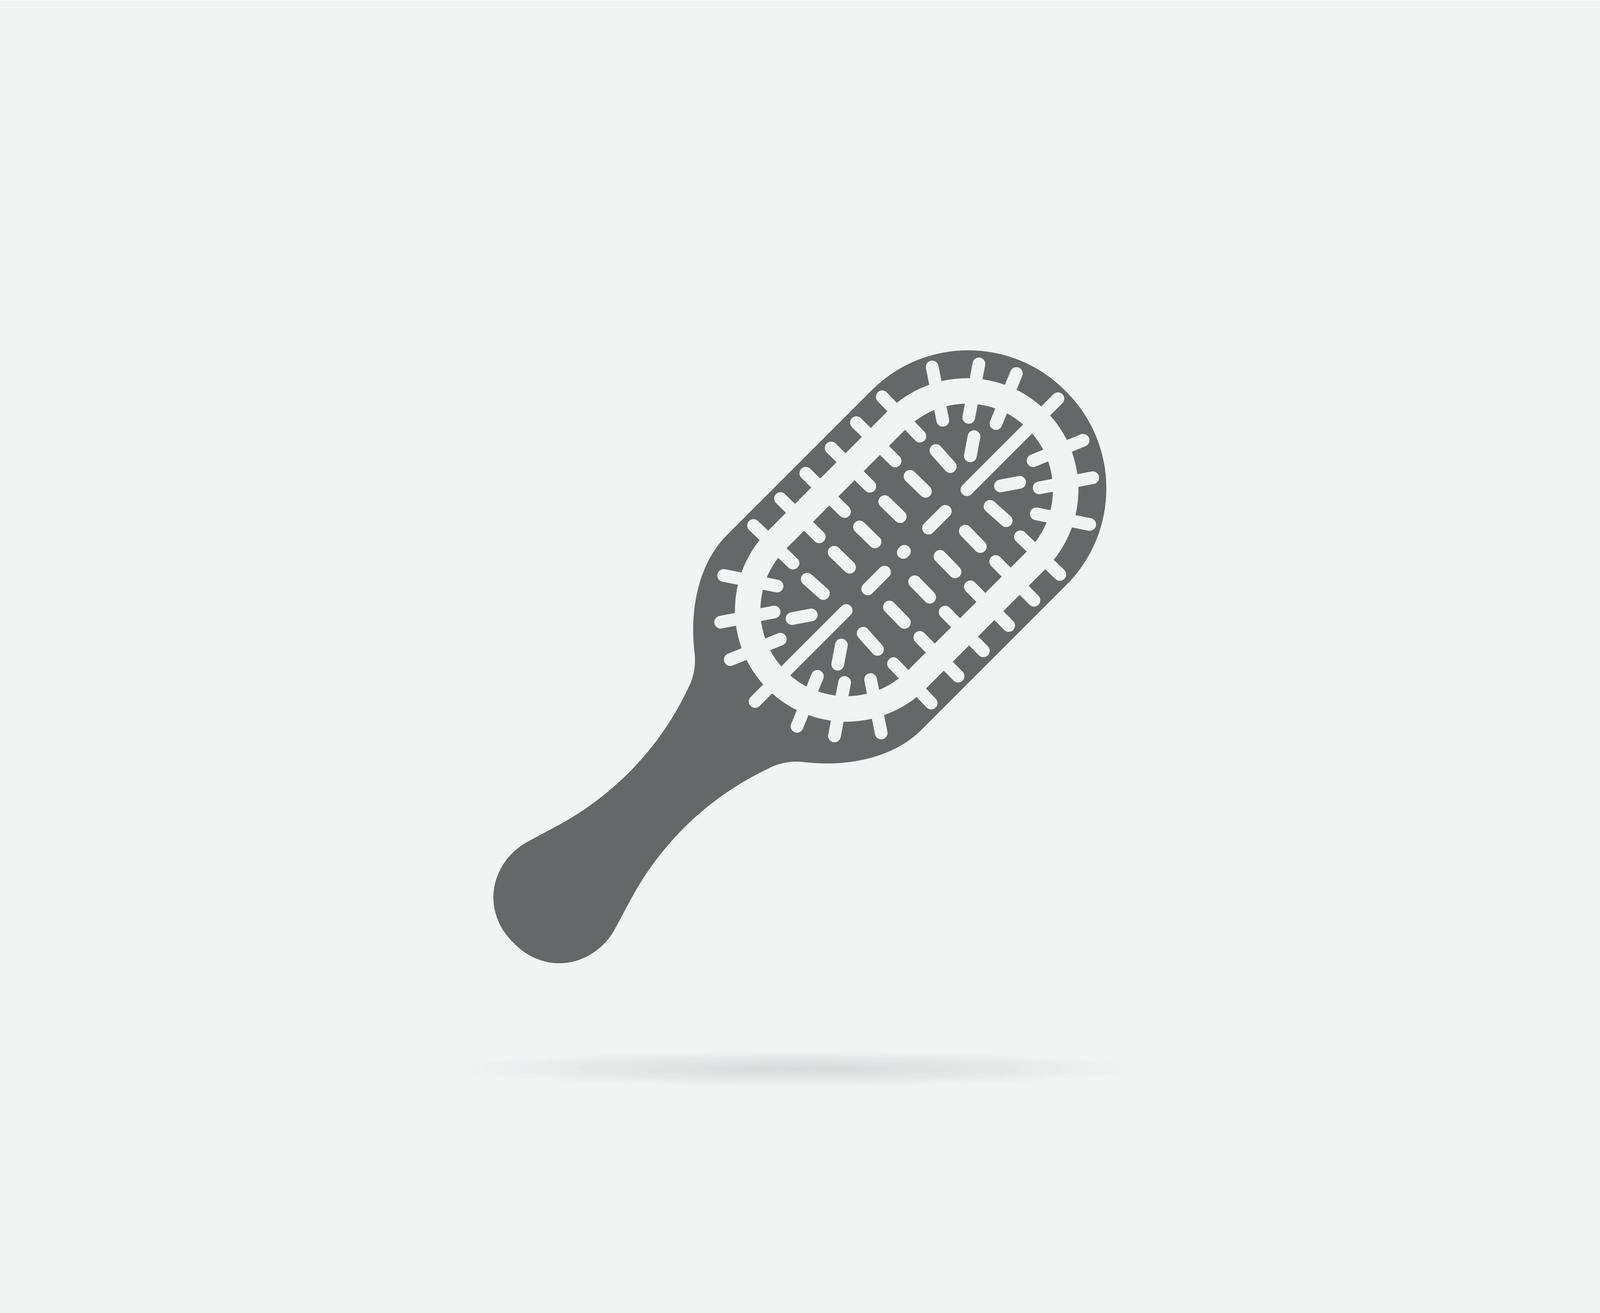 Hair Brush with Cushion Vector Element or Icon, Illustration Ready for Print or Plotter Cut or Using as Logotype with High Quality